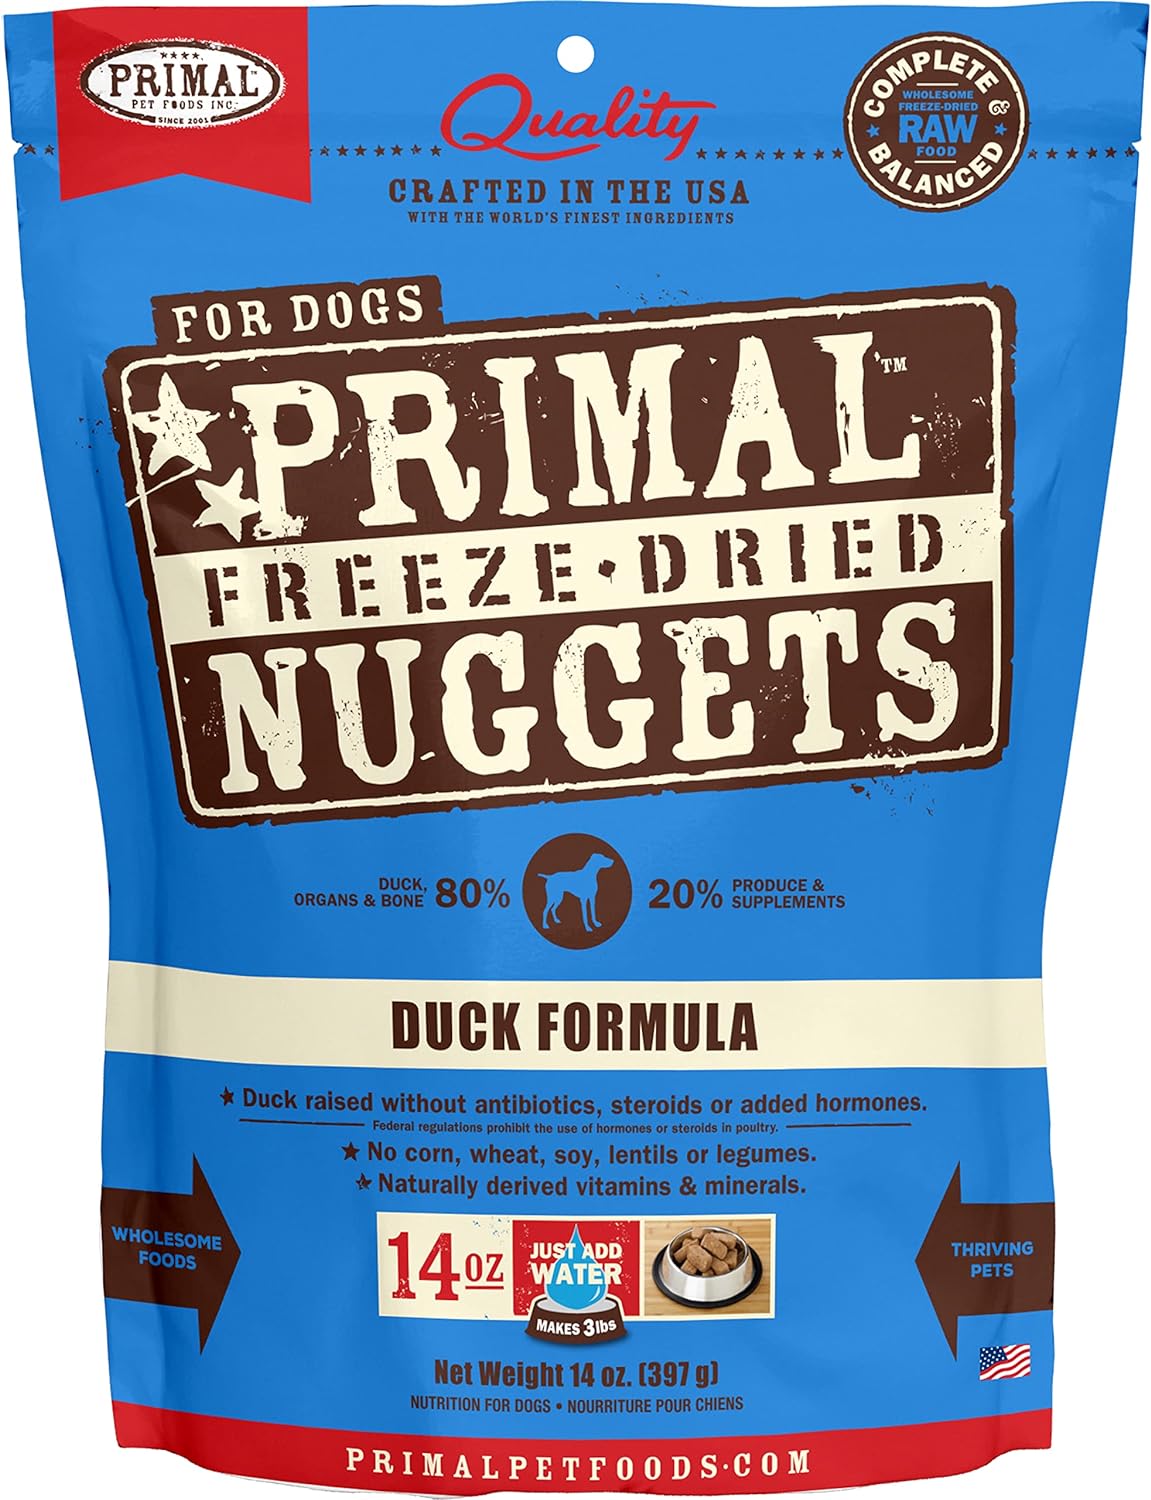 Primal Freeze Dried Dog Food Nuggets, Duck; Complete & Balanced Meal; Also Use as Topper or Treat; Premium, Healthy, Grain Free, High Protein Raw Dog Food, 14 oz